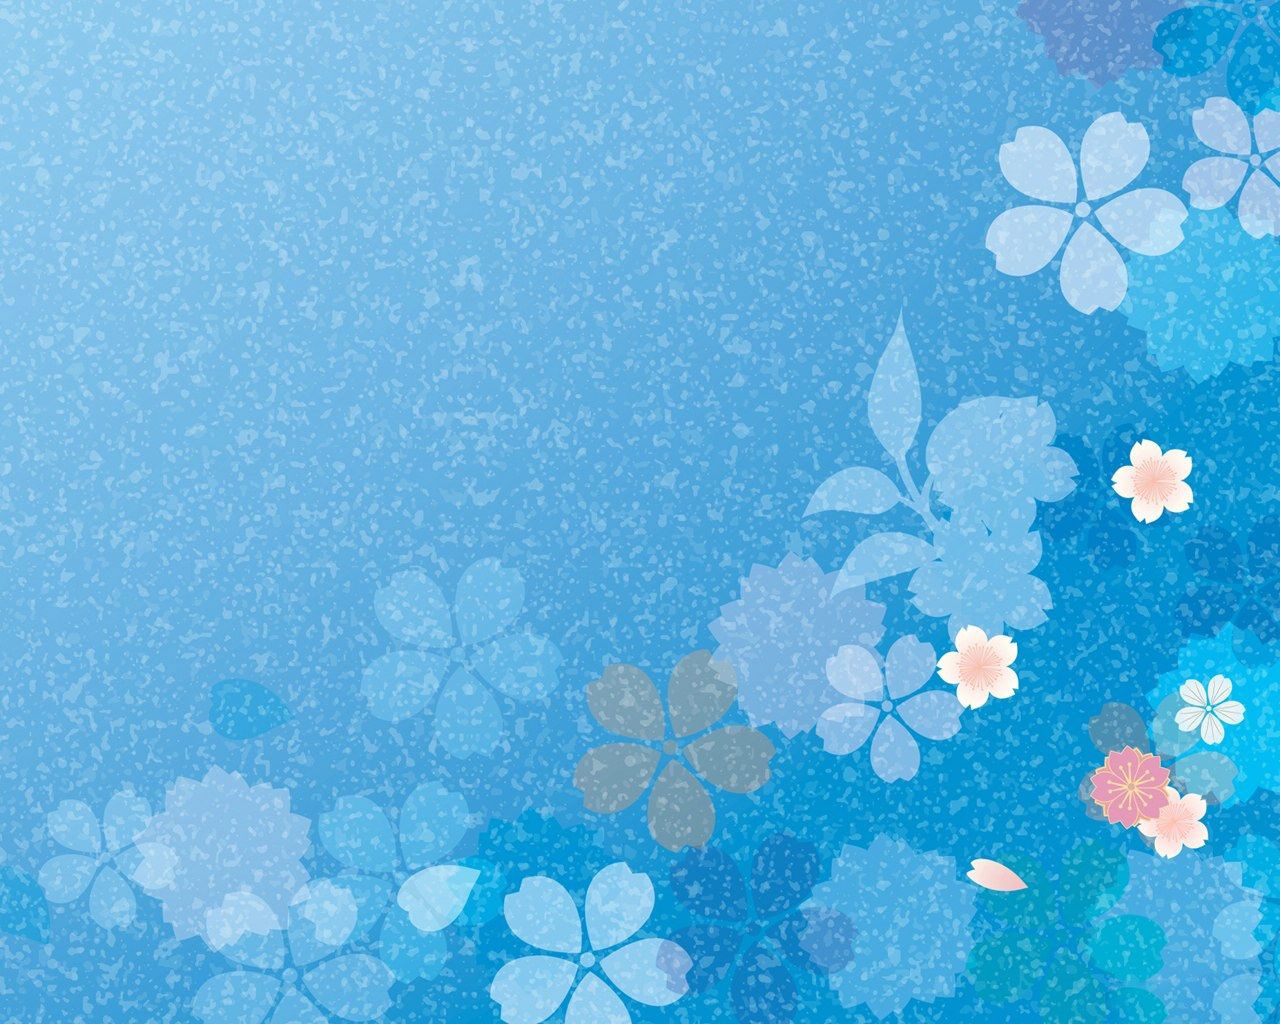 Pics Of Windows 7 Flower In Hd Quality - Background Design Blue Flower -  1280x1024 Wallpaper 